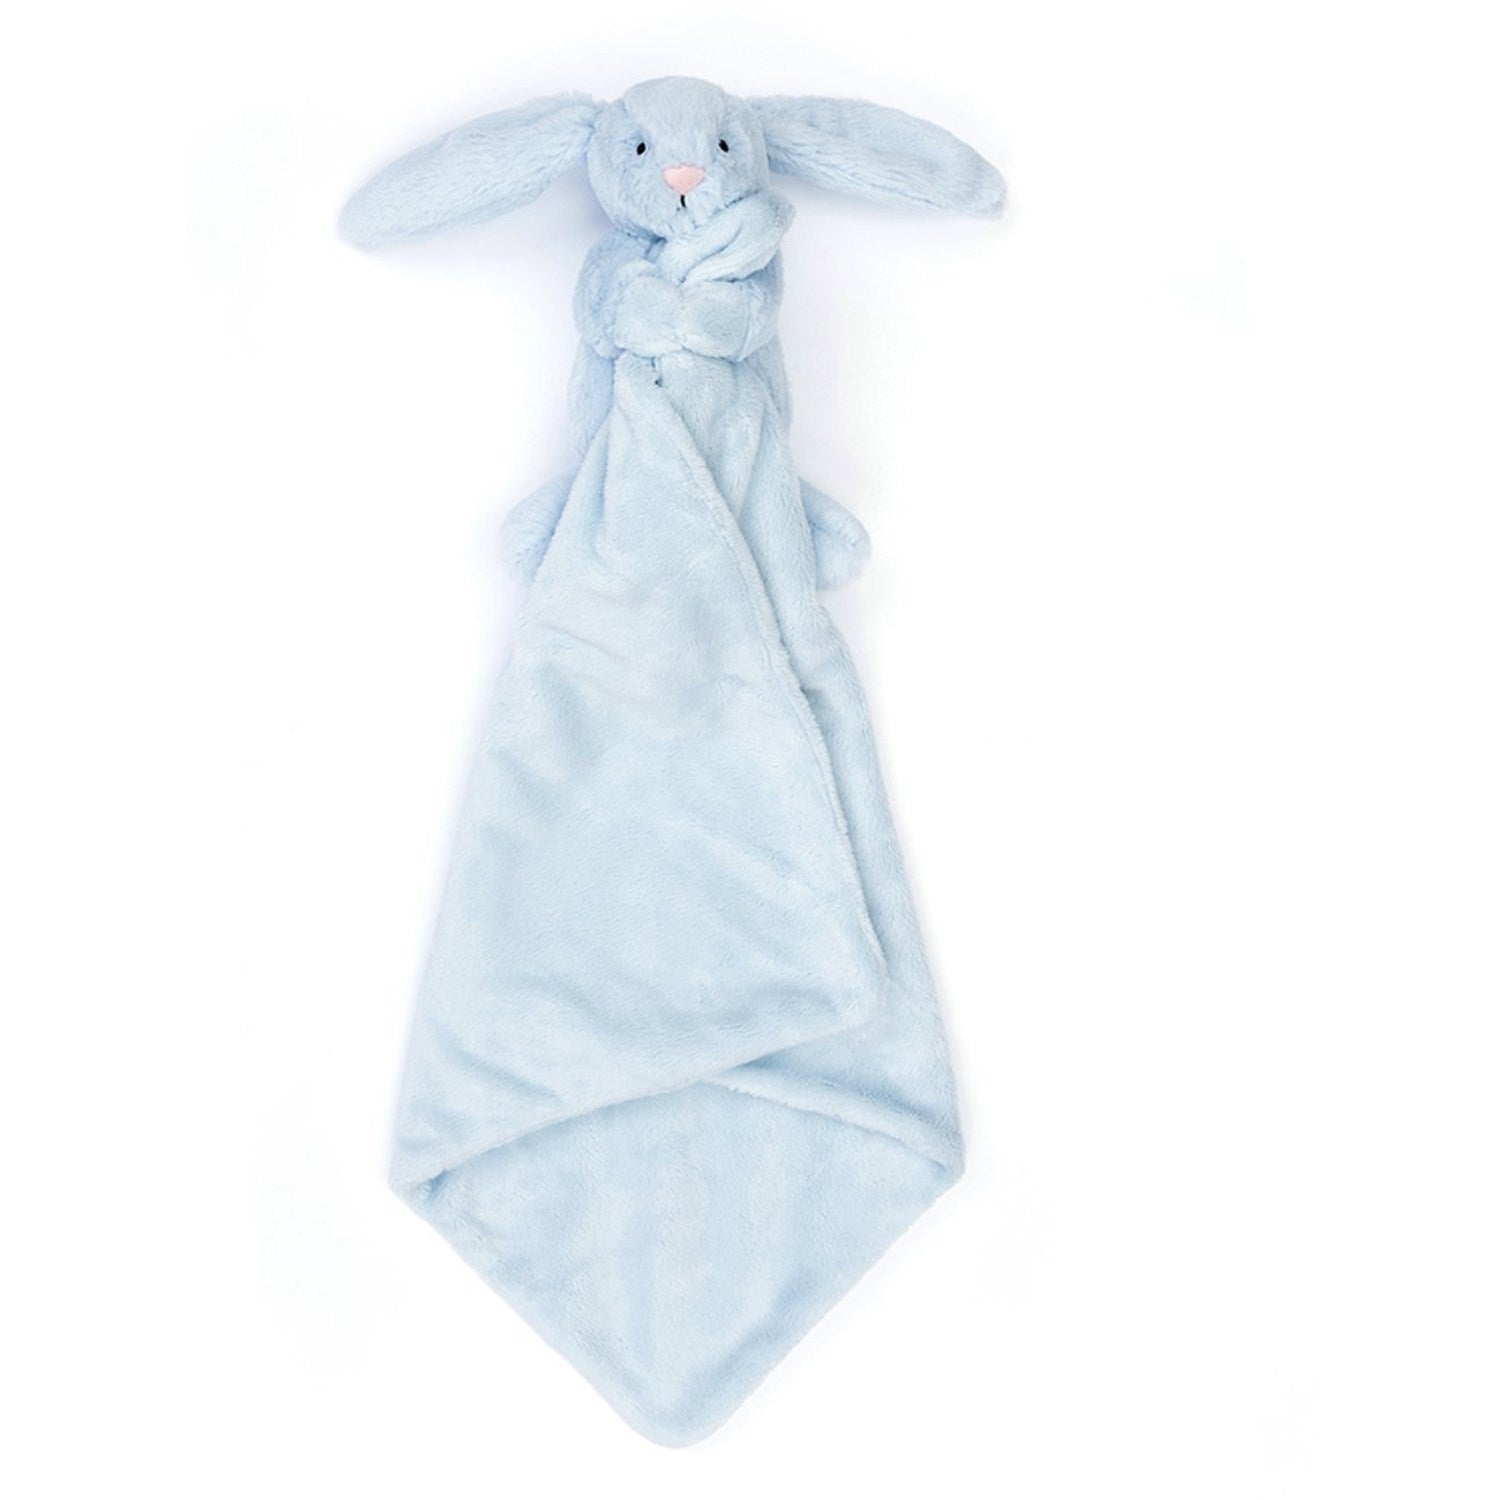   Bashful Blue Bunny Soother 2